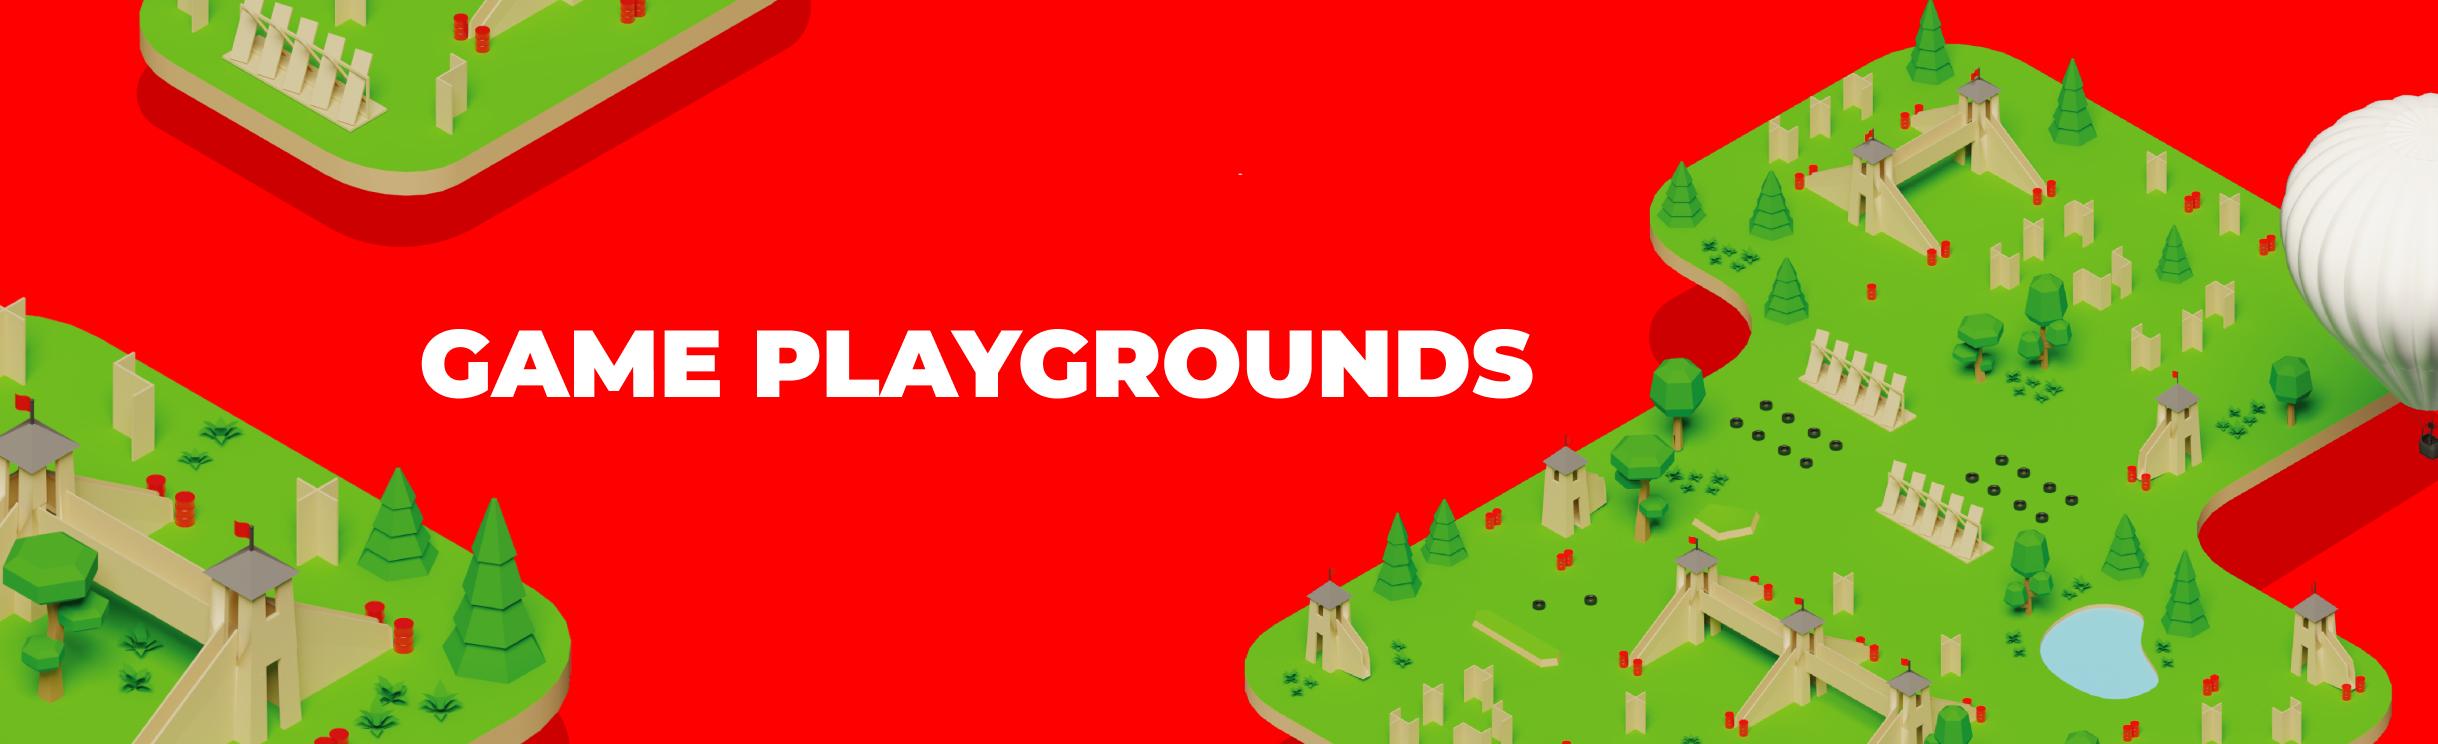 Laser tag game-playgrounds